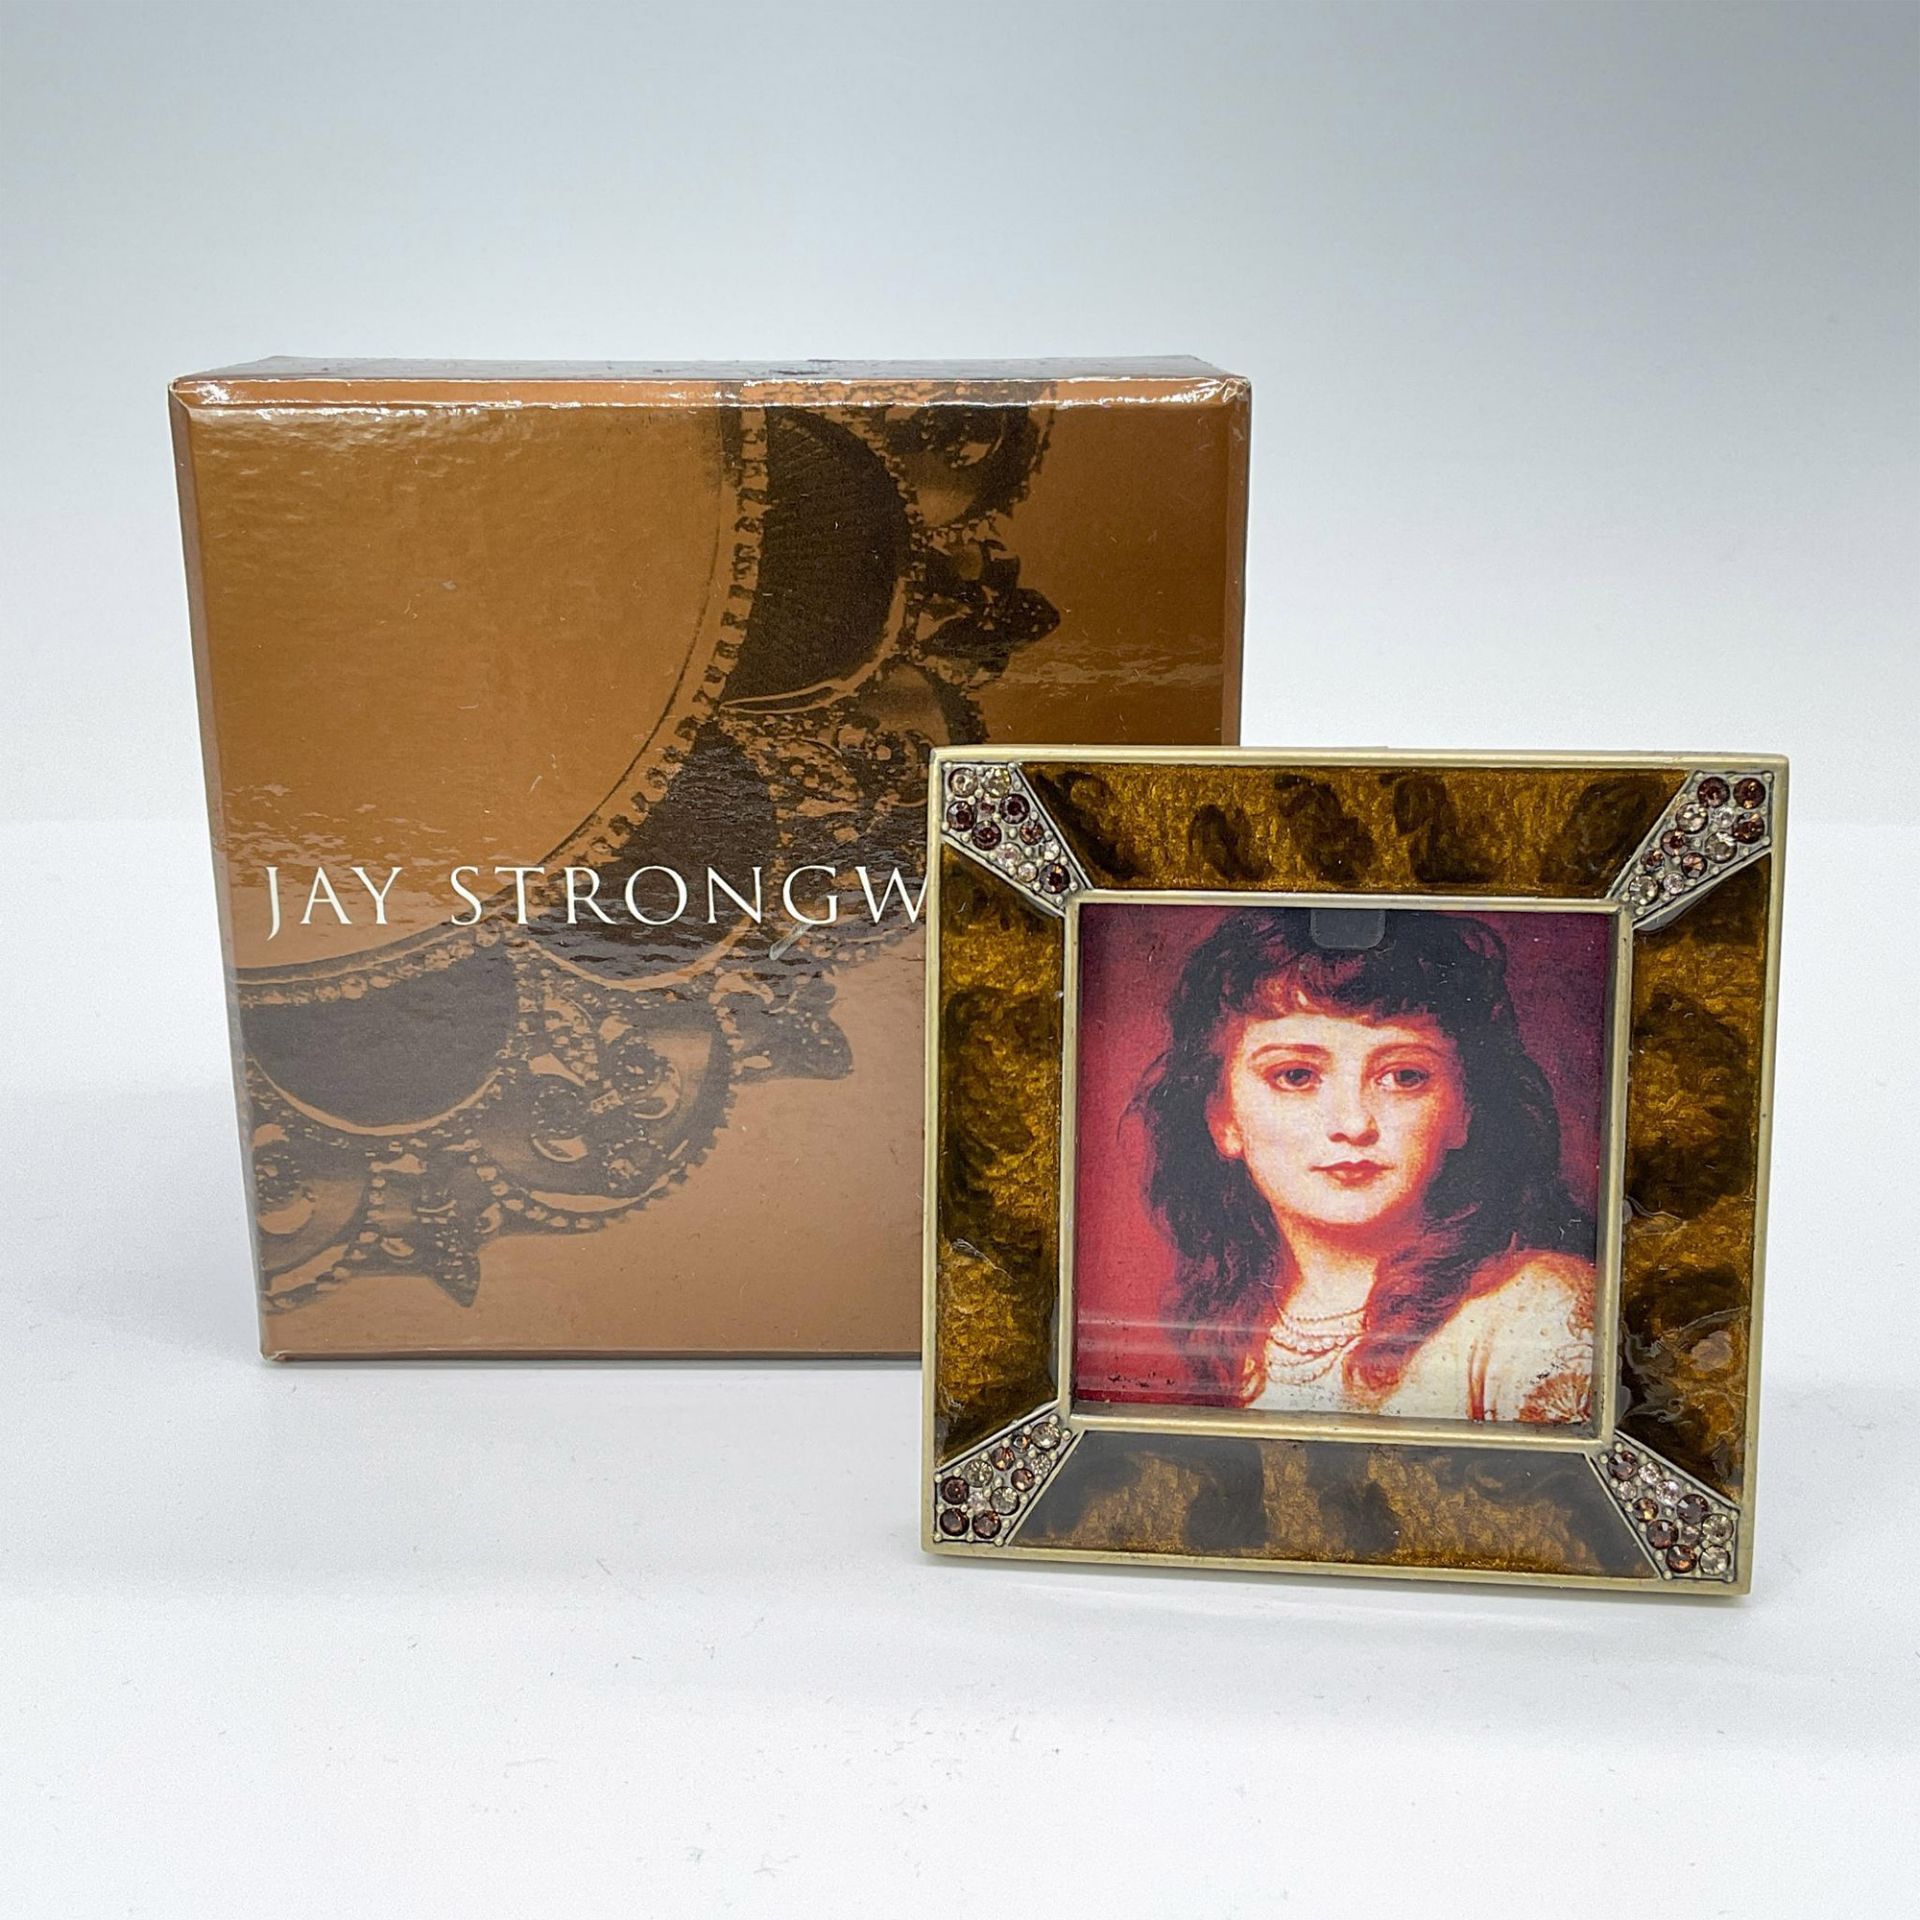 Jay Strongwater Small Picture Frame, Animal Print - Image 3 of 3